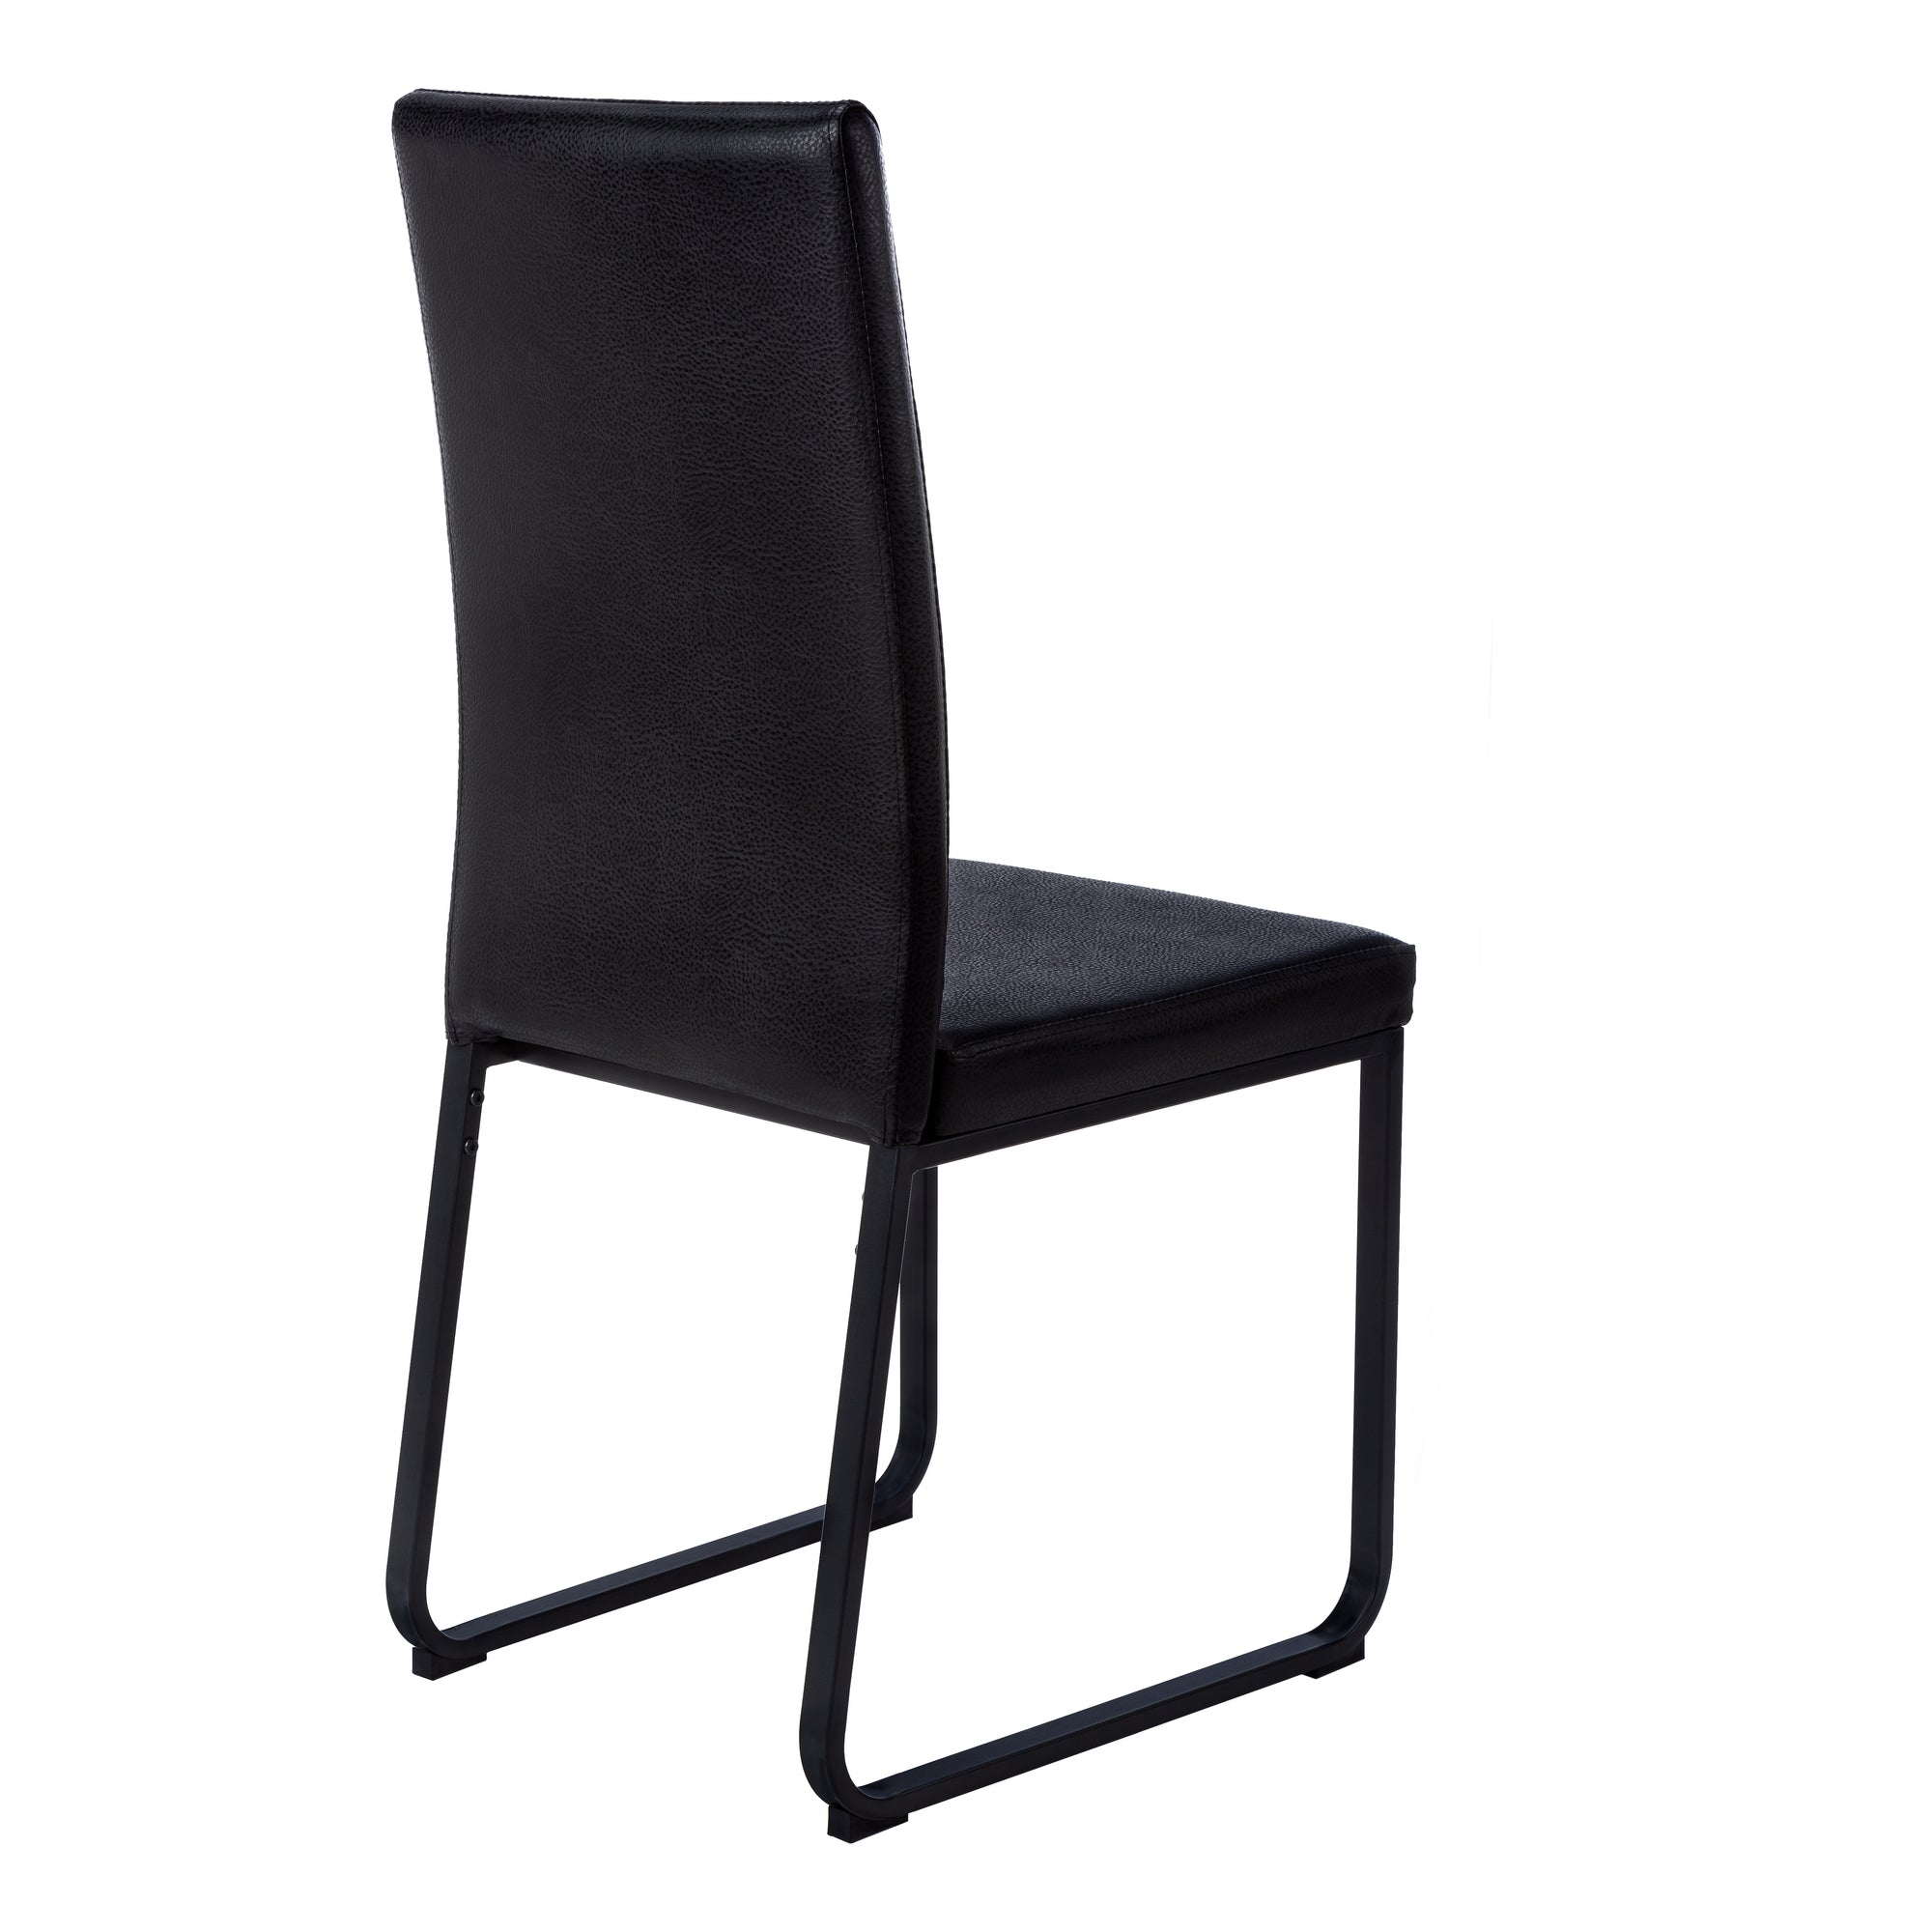 ViscoLogic DINING CHAIR - 2PCS / 38"H / BLACK LEATHER-LOOK / BLACK